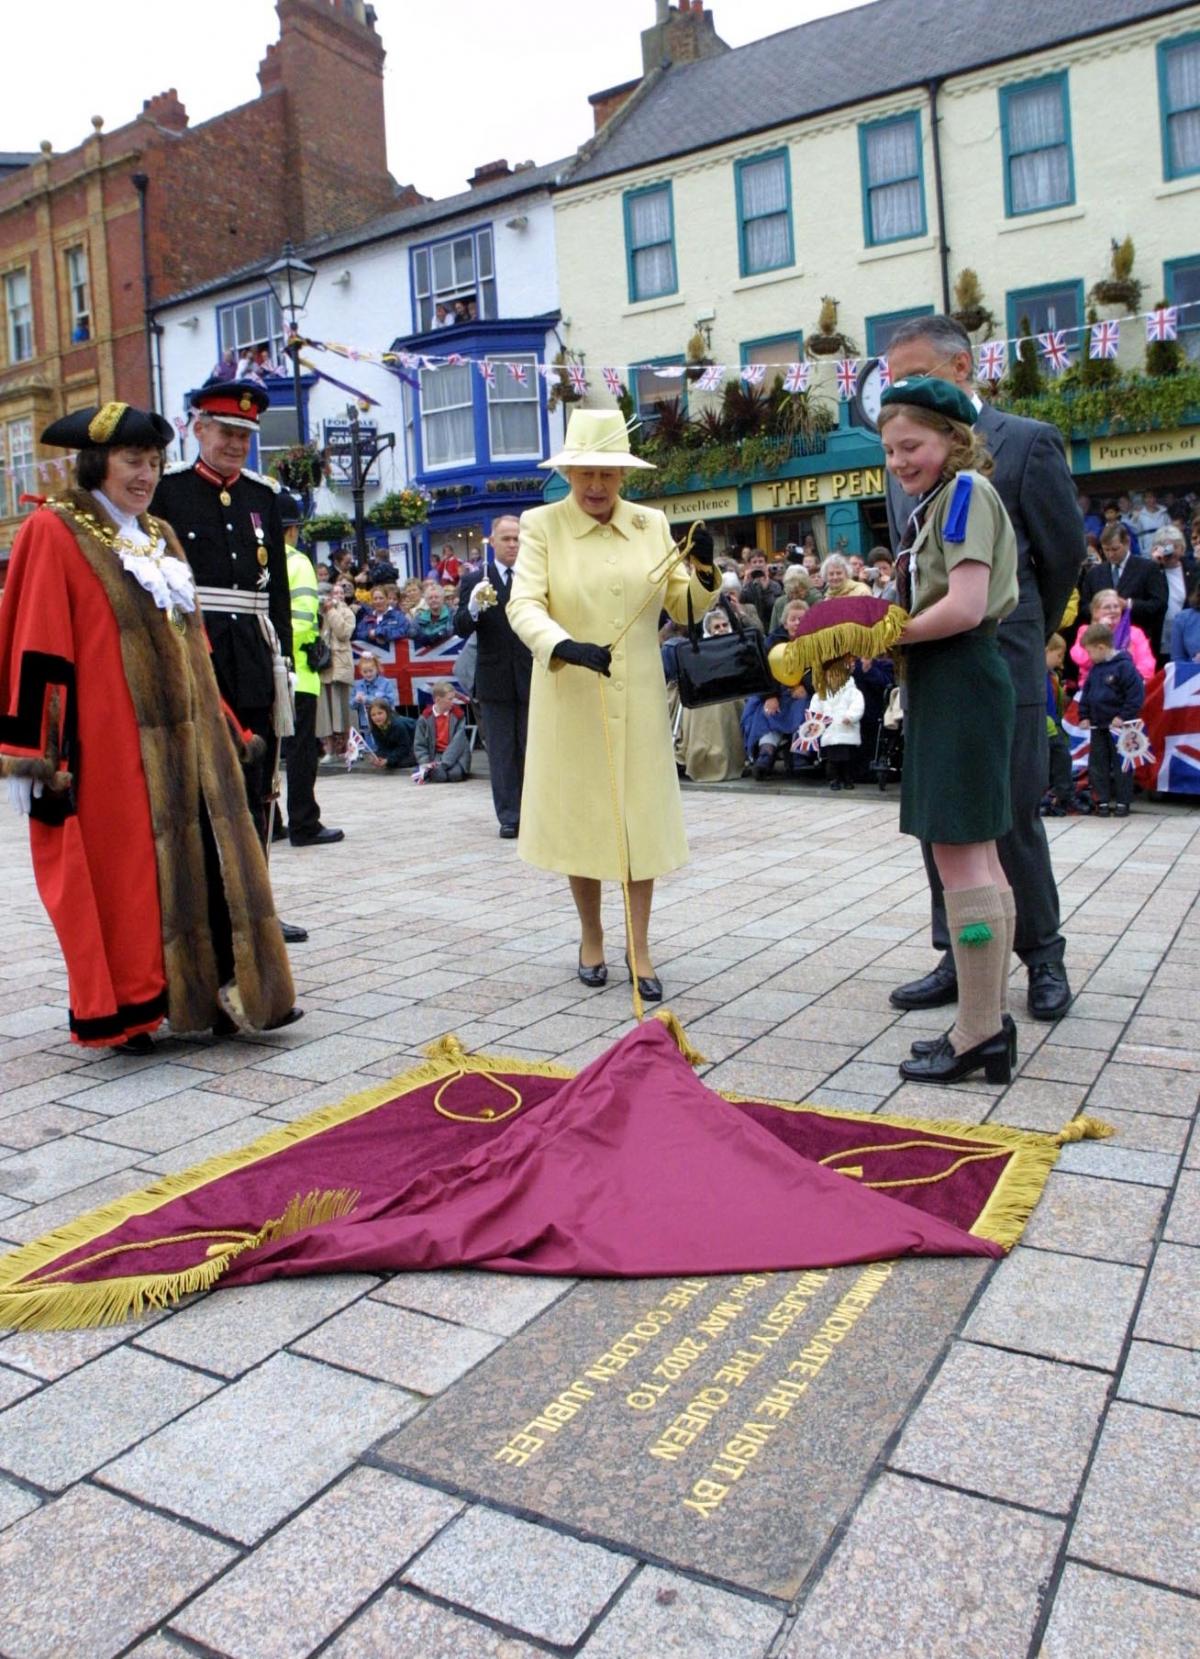 he Queen unveils a commemorative plaque in the Market Place in Darlington during her Golden Jubilee tour of the region